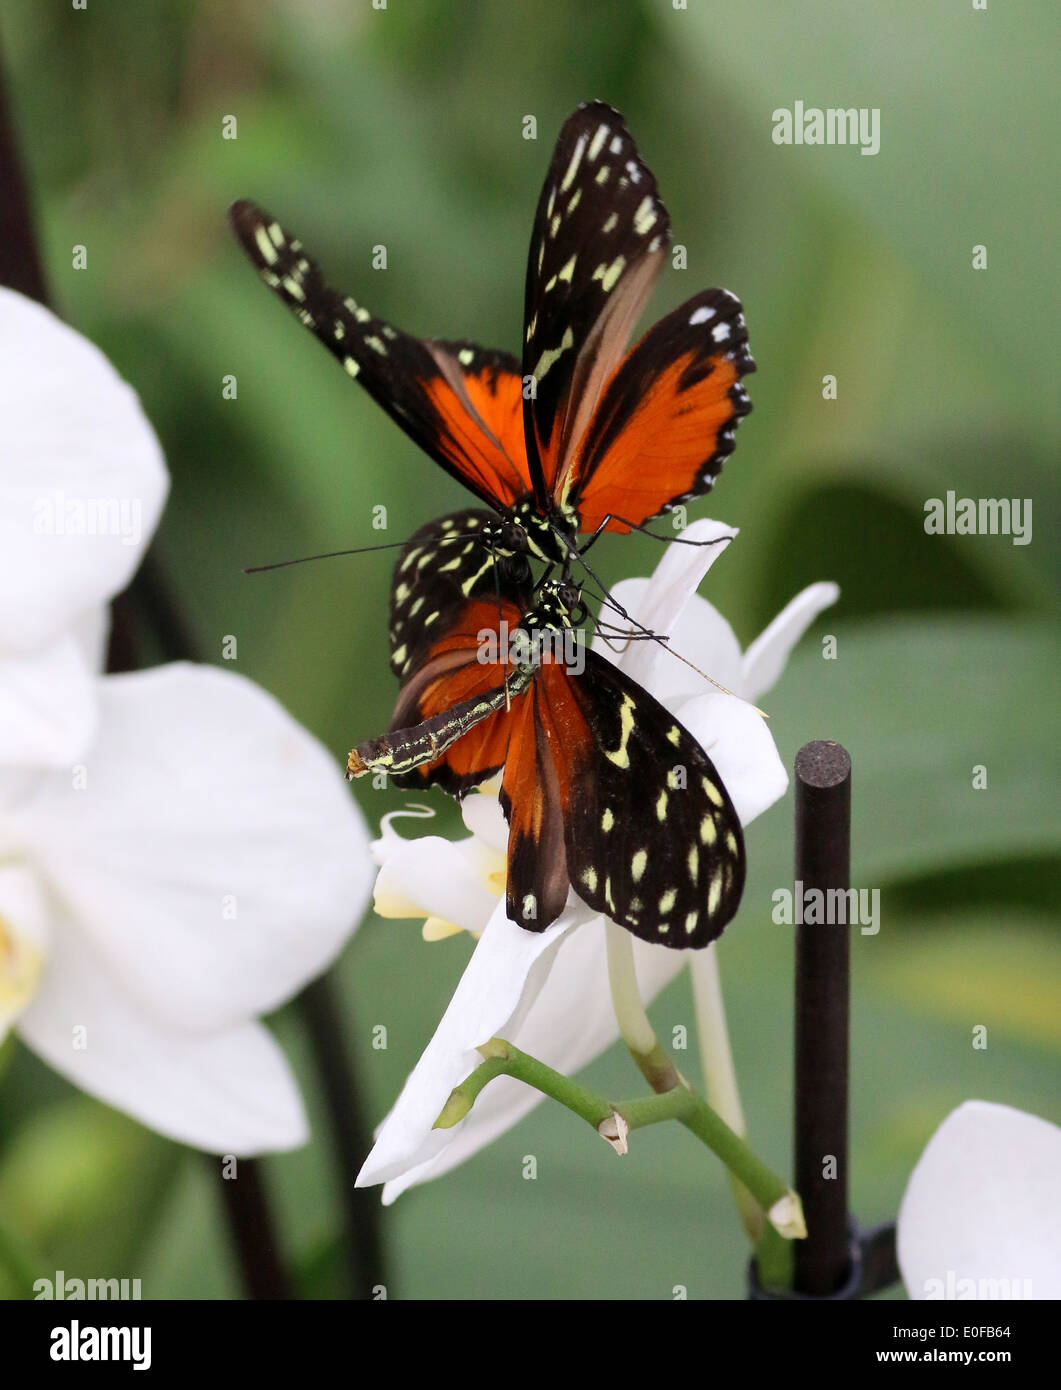 Tiger Longwing, Hecale Longwing or Golden Longwing butterfly (Heliconius Hecale) feeding on a tropical flower Stock Photo